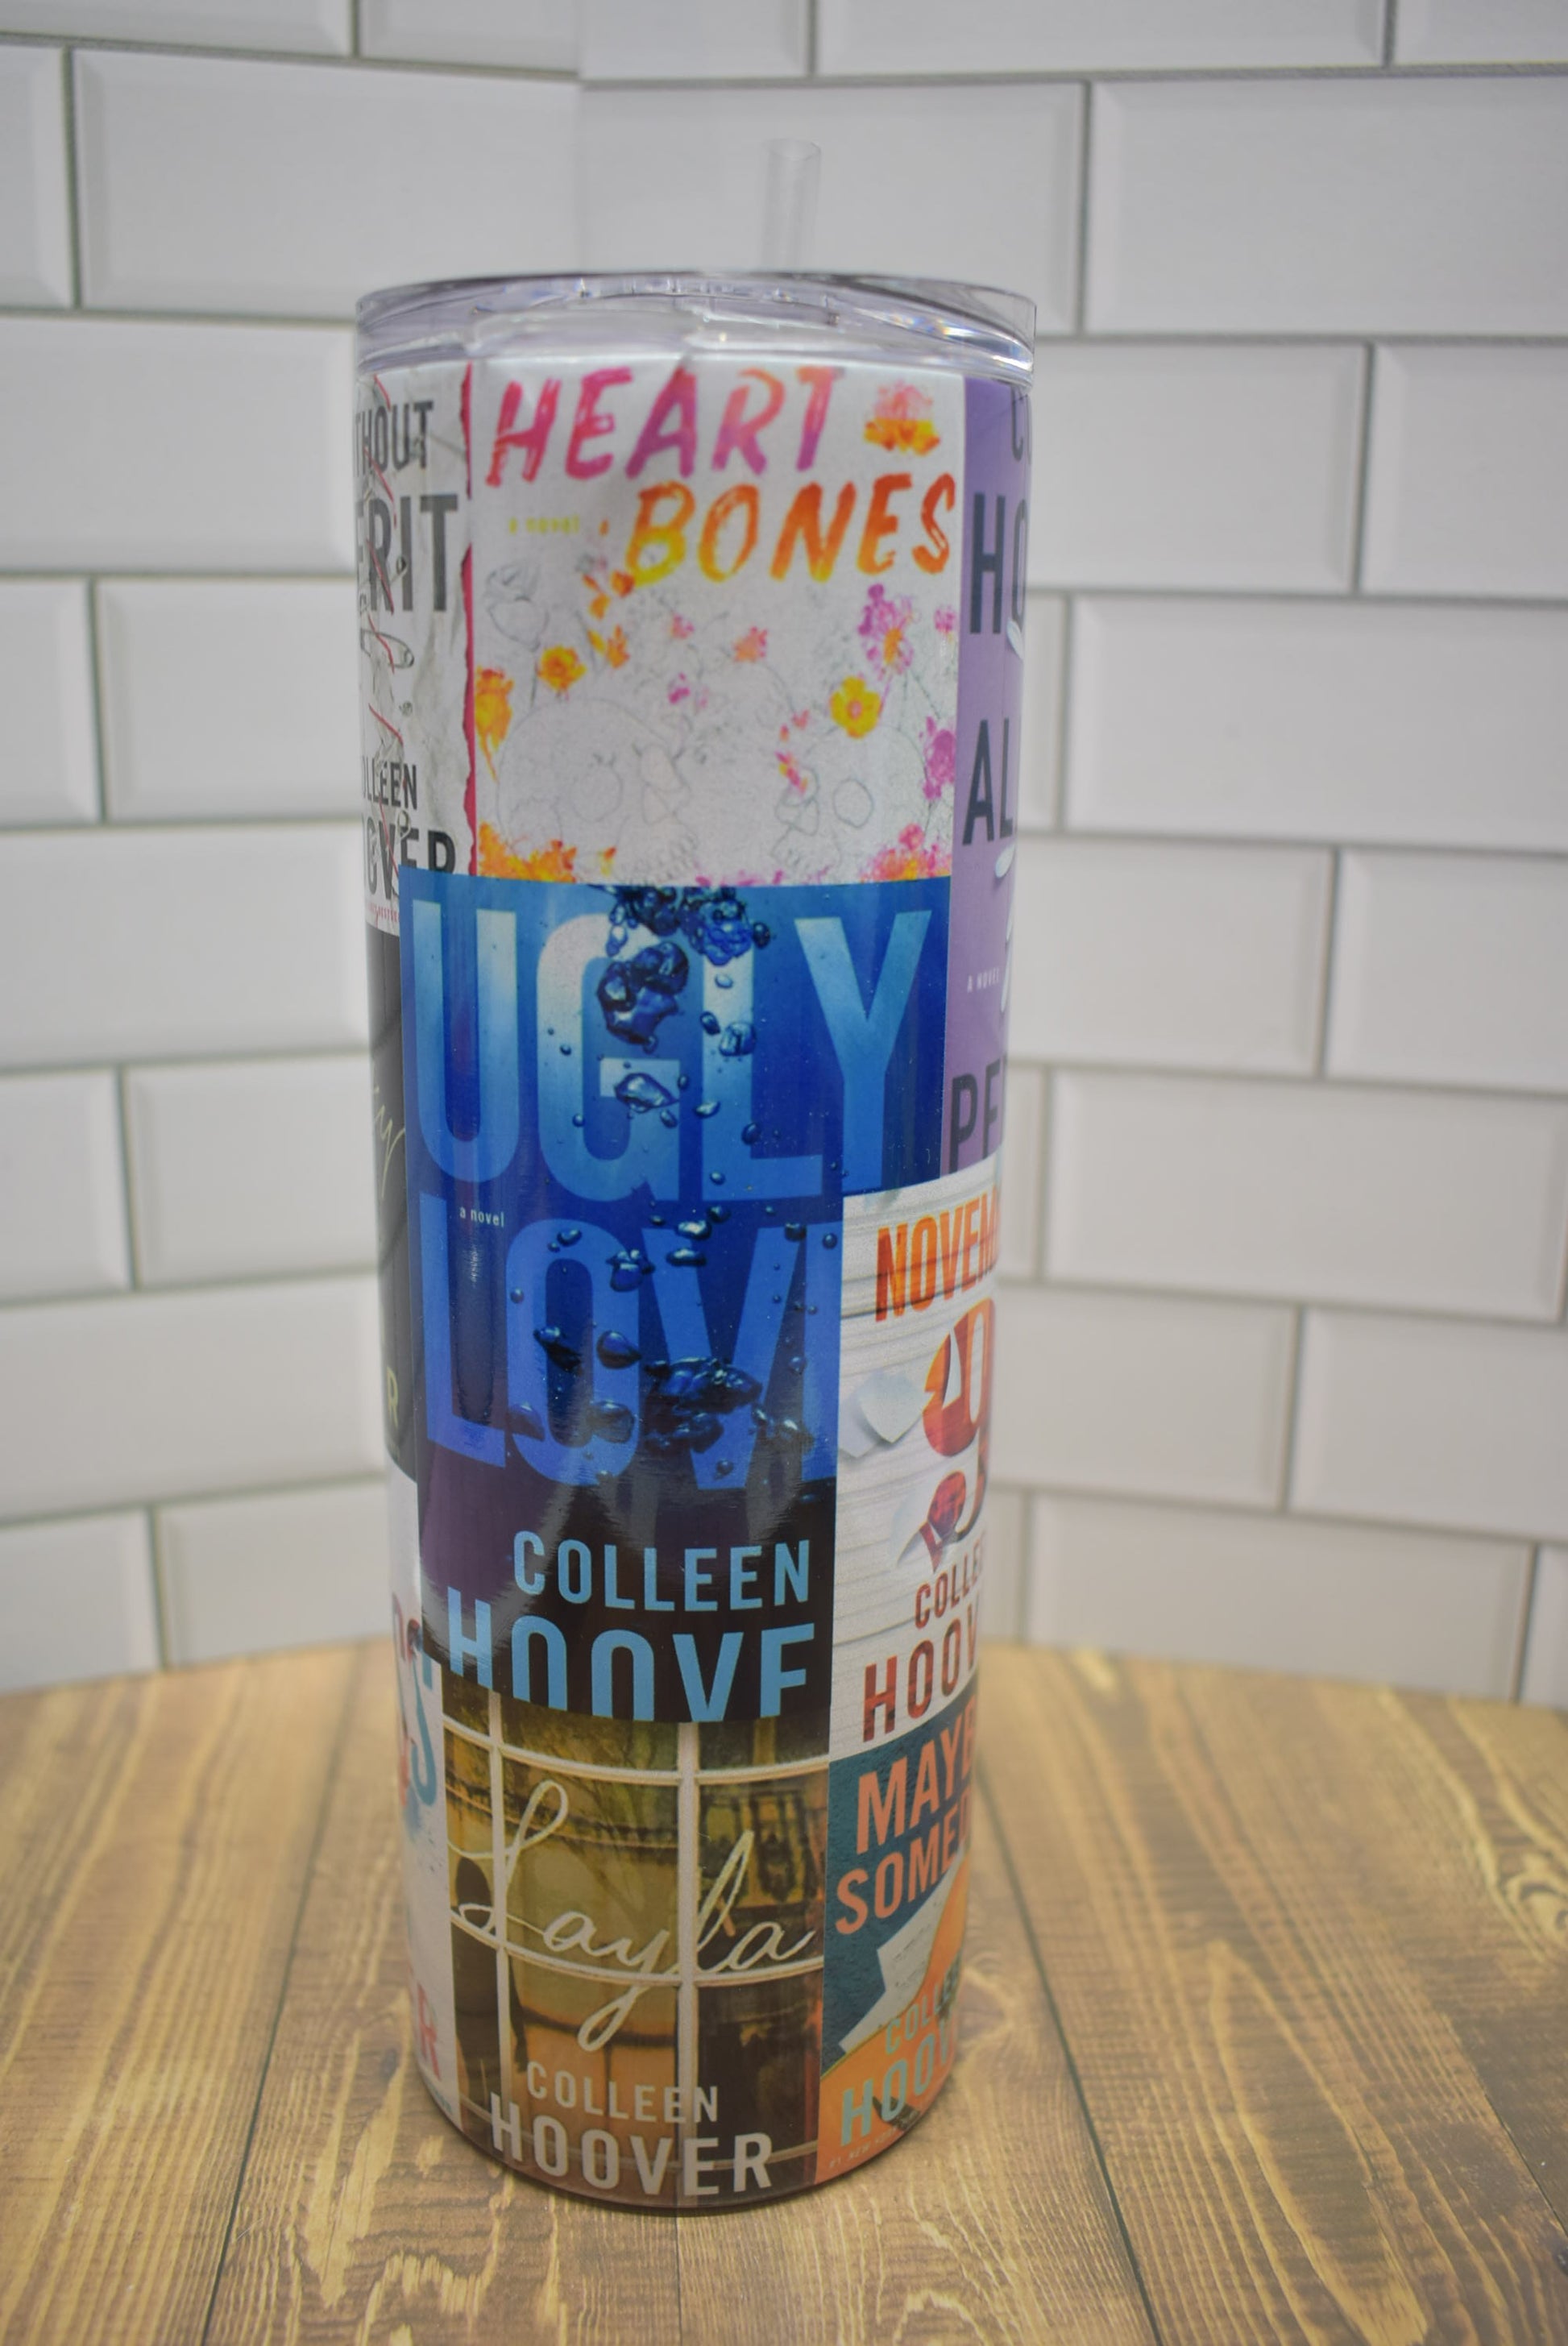 Sip in style with the Makerflo 20 oz Stainless Steel Sublimated Tumbler. Featuring a vibrant book club design from Colleen Hoover, the high-quality stainless steel construction and sweat-resistant design ensures your favorite drinks stay cool for longer.